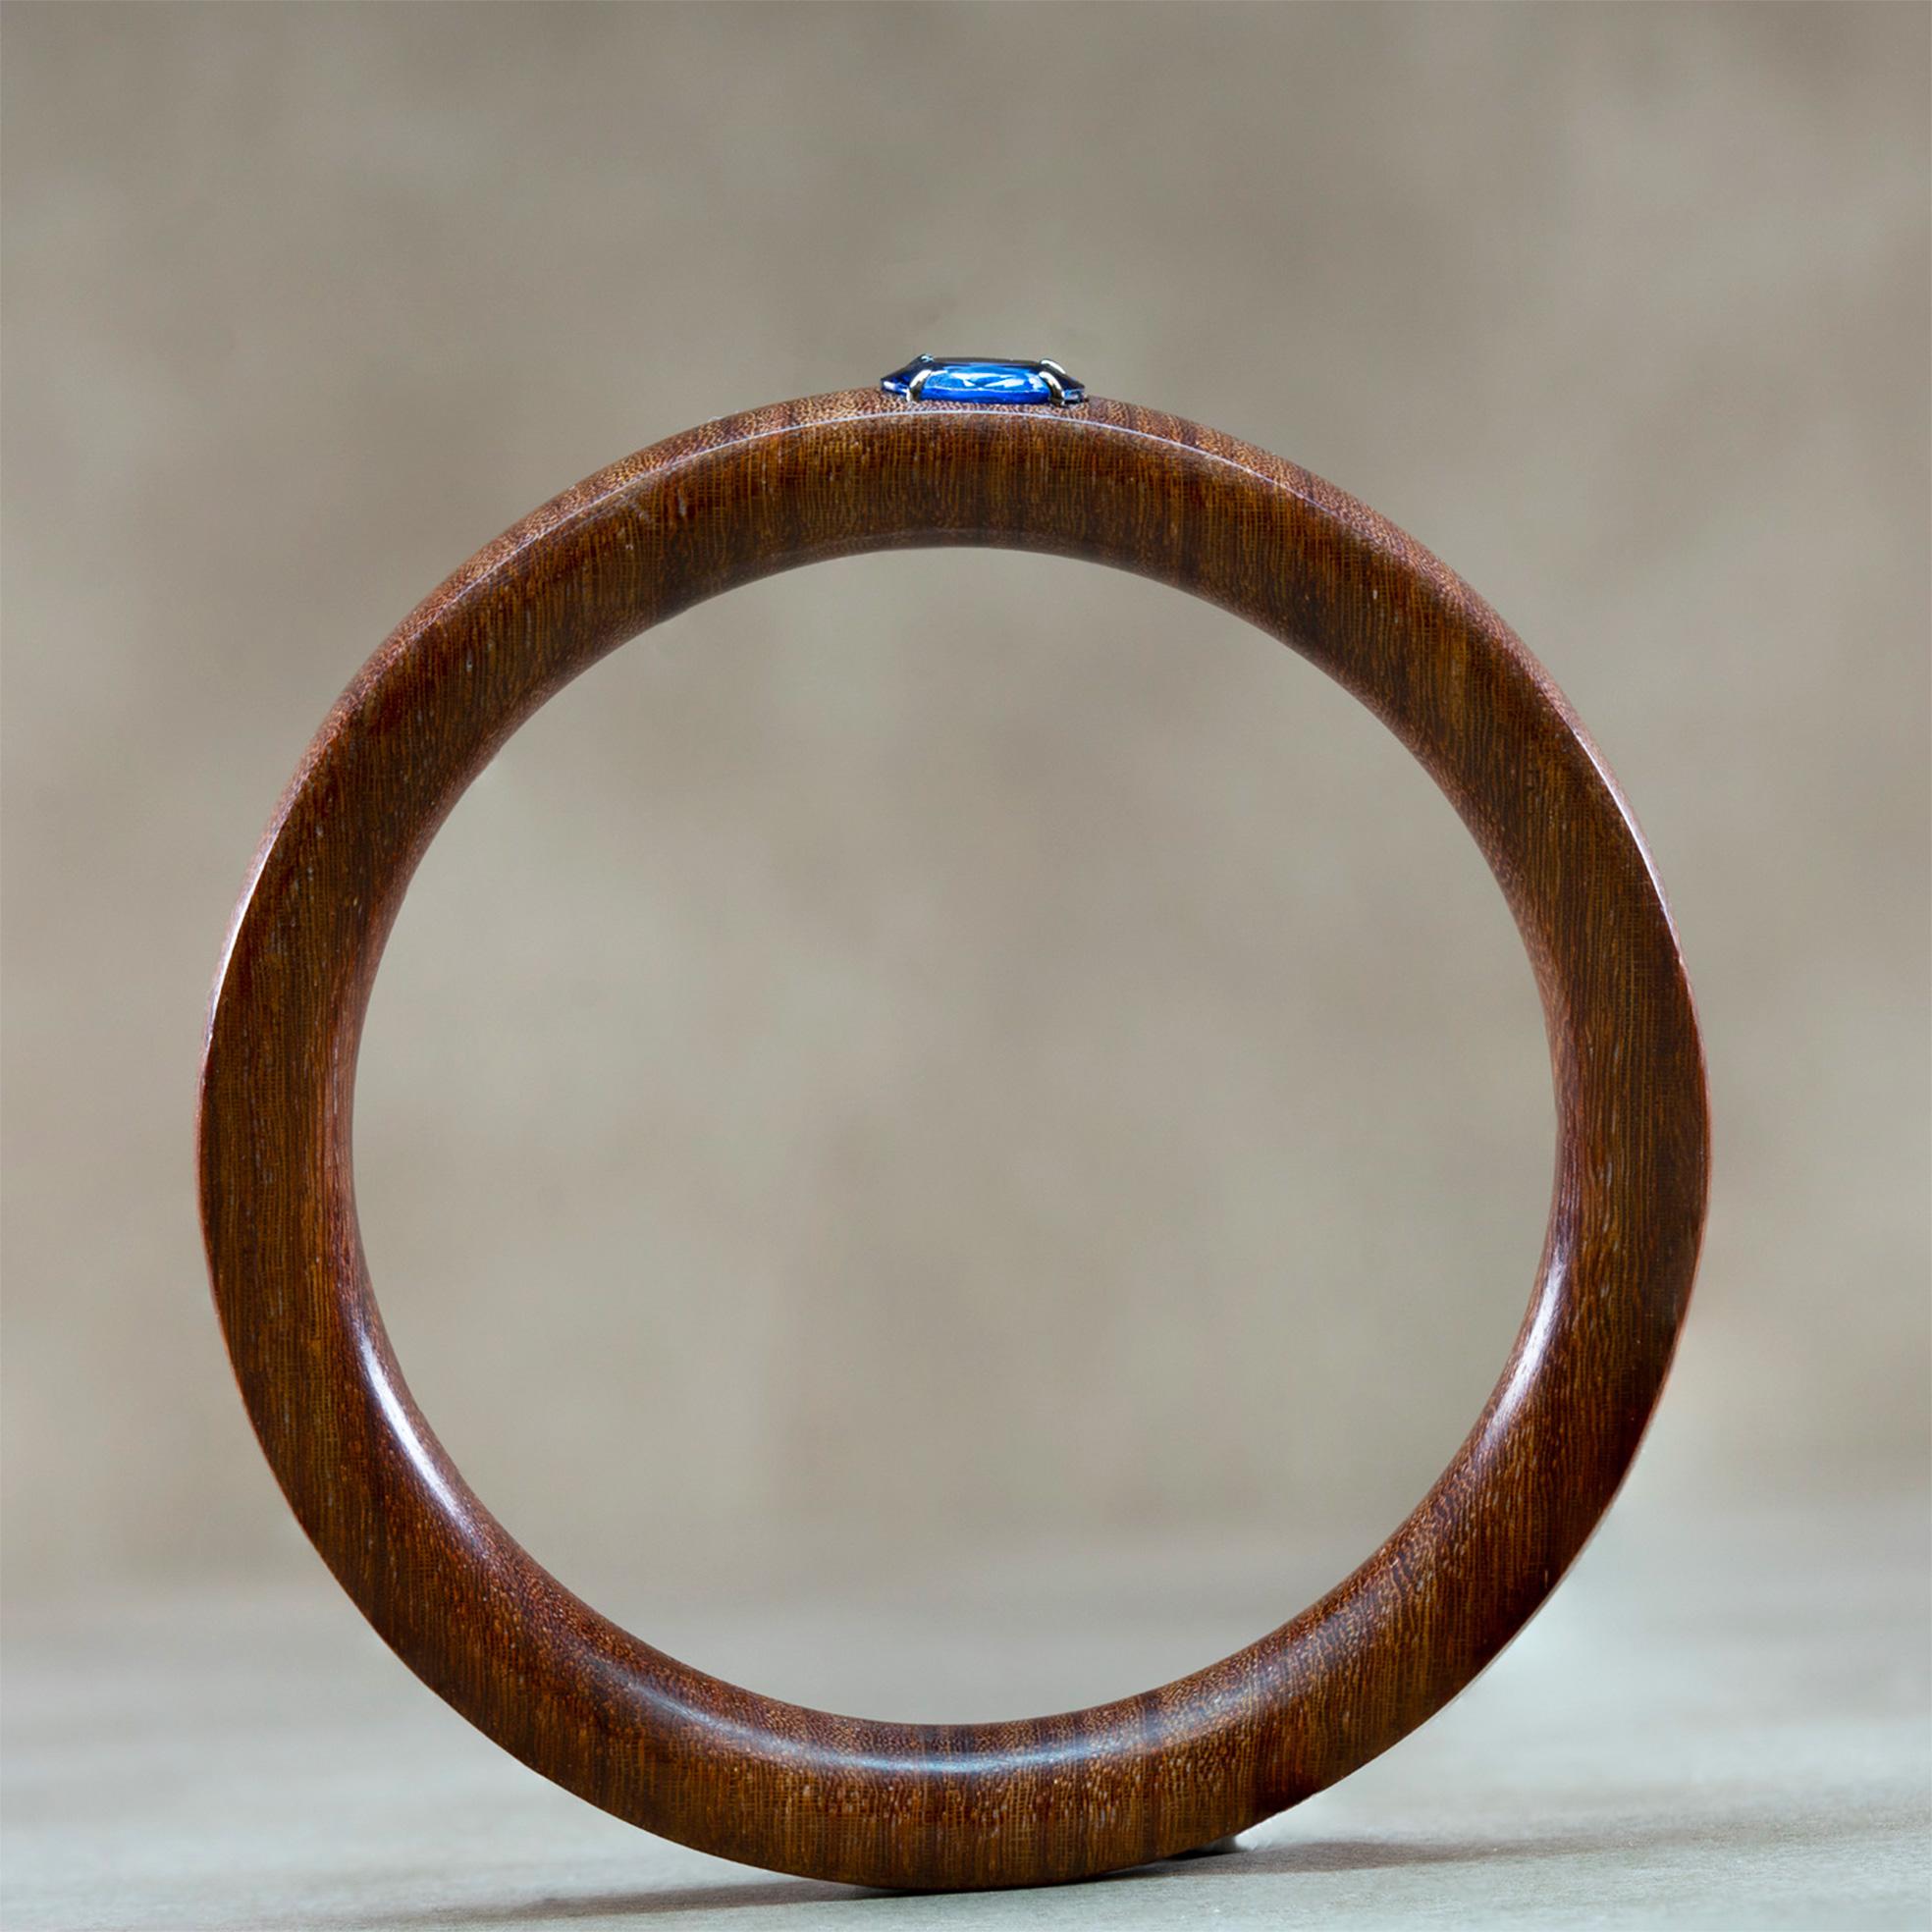 3.20 Carat Oval Blue Iolite Rosewood Bangle Bracelet

- A contemporary bracelet carved in Rosewood
- Set with a 3.20 ct. blue Iolite and 18k Gold


